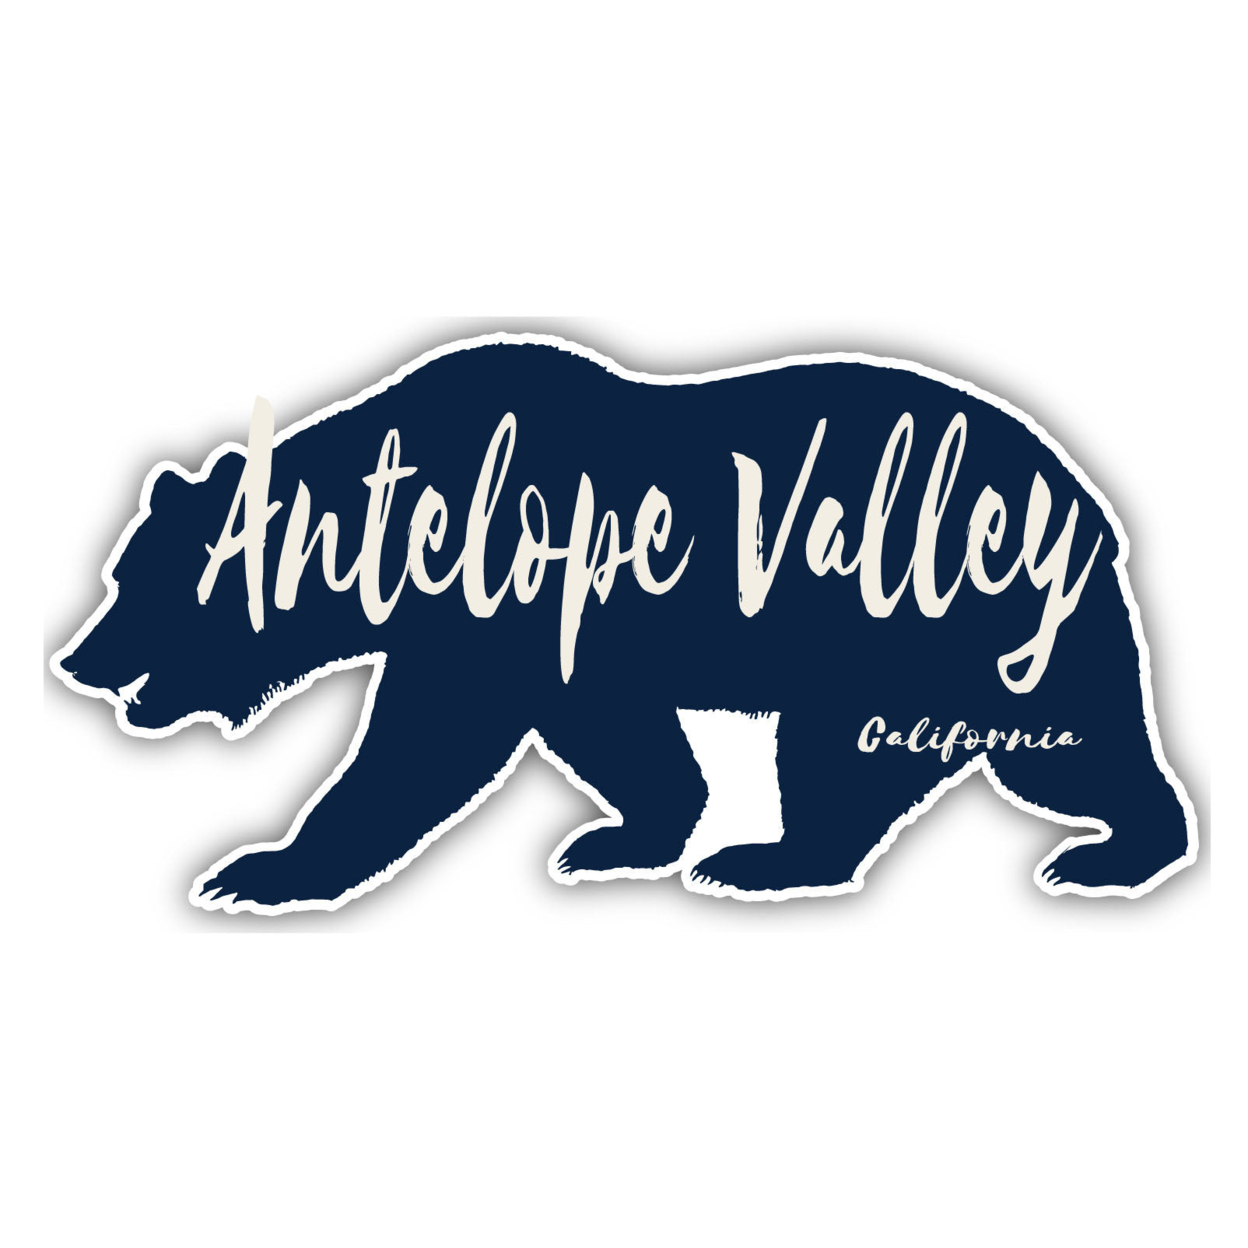 Antelope Valley California Souvenir Decorative Stickers (Choose Theme And Size) - Single Unit, 2-Inch, Camp Life